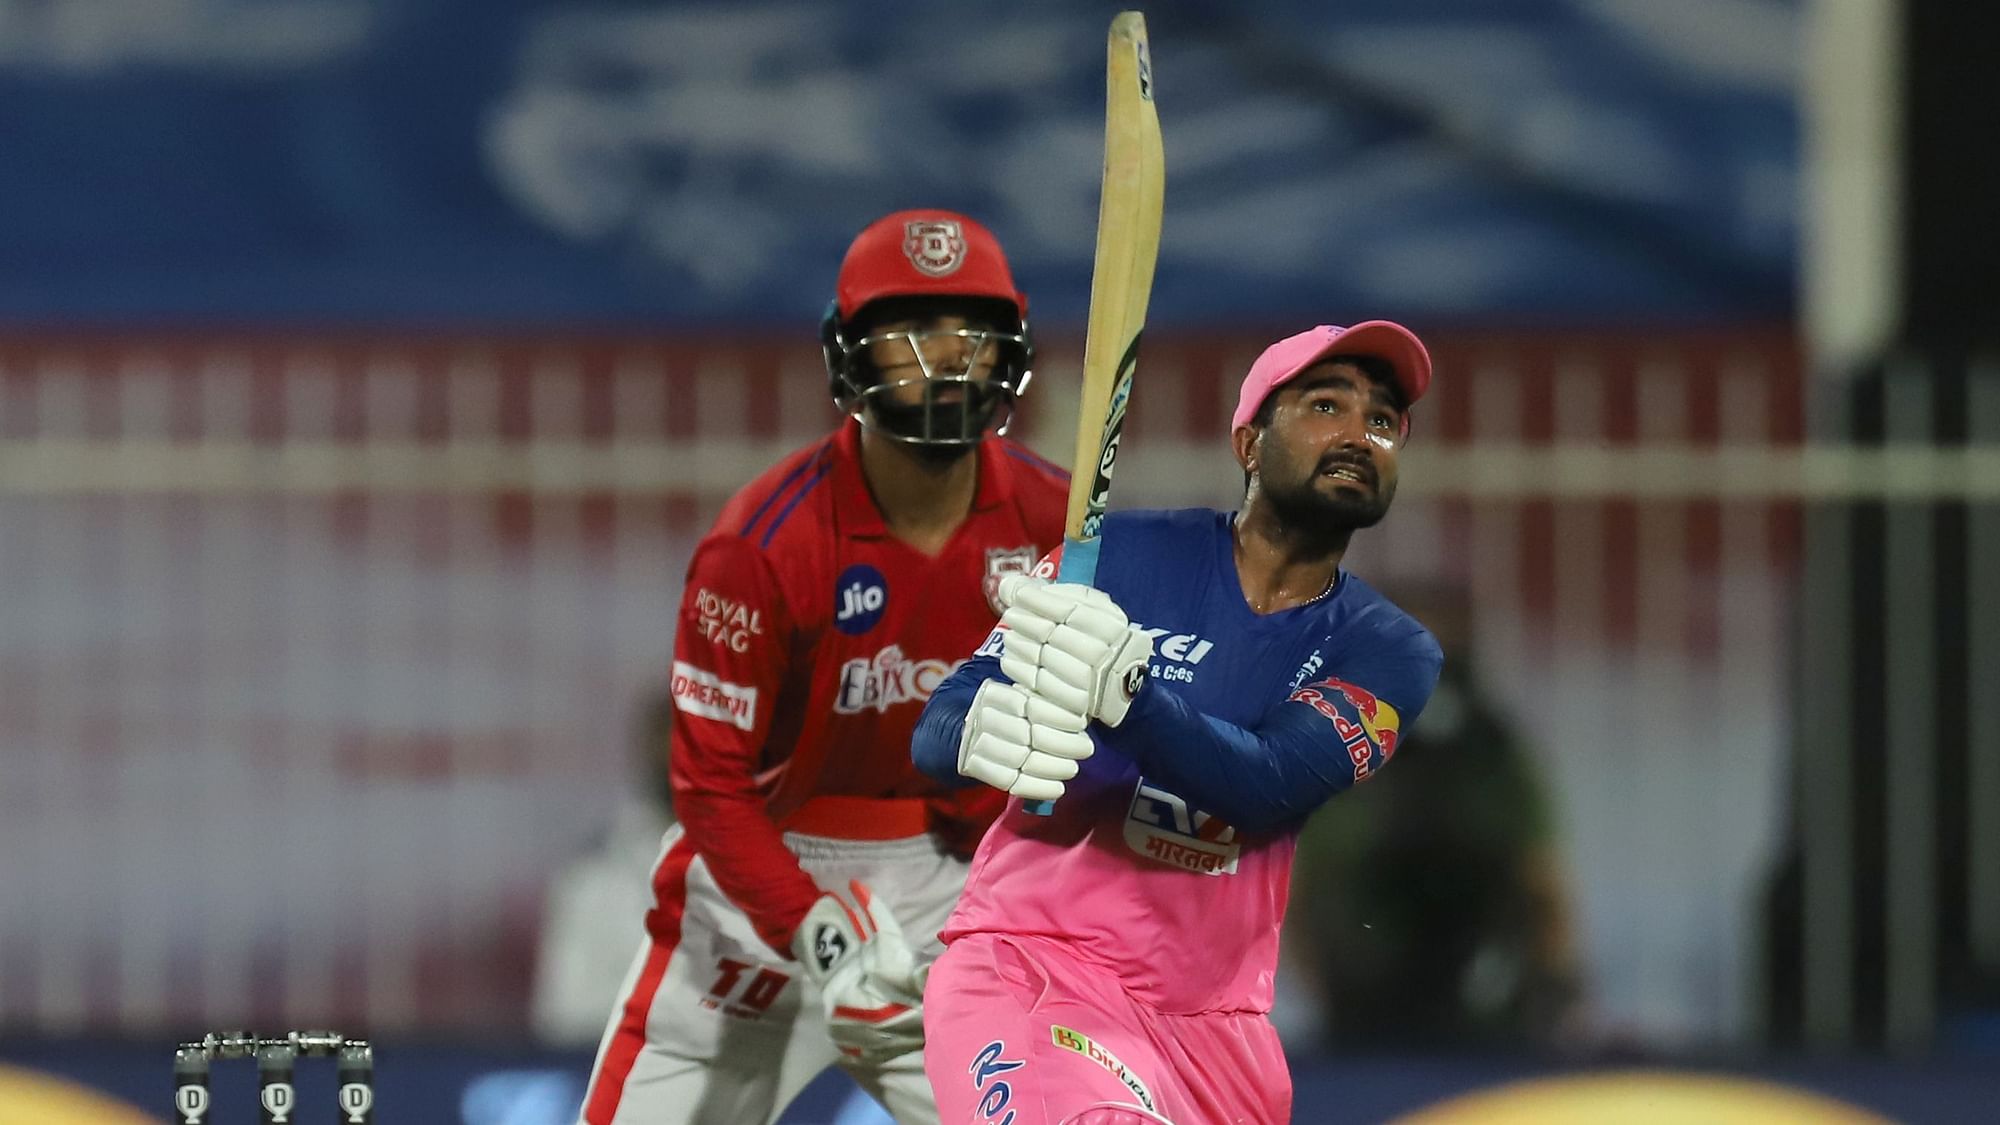 Rajasthan Royals’ Rahul Tewatia hit 5 sixes in an over off Kings XI Punjab’s Sheldon Cottrell.